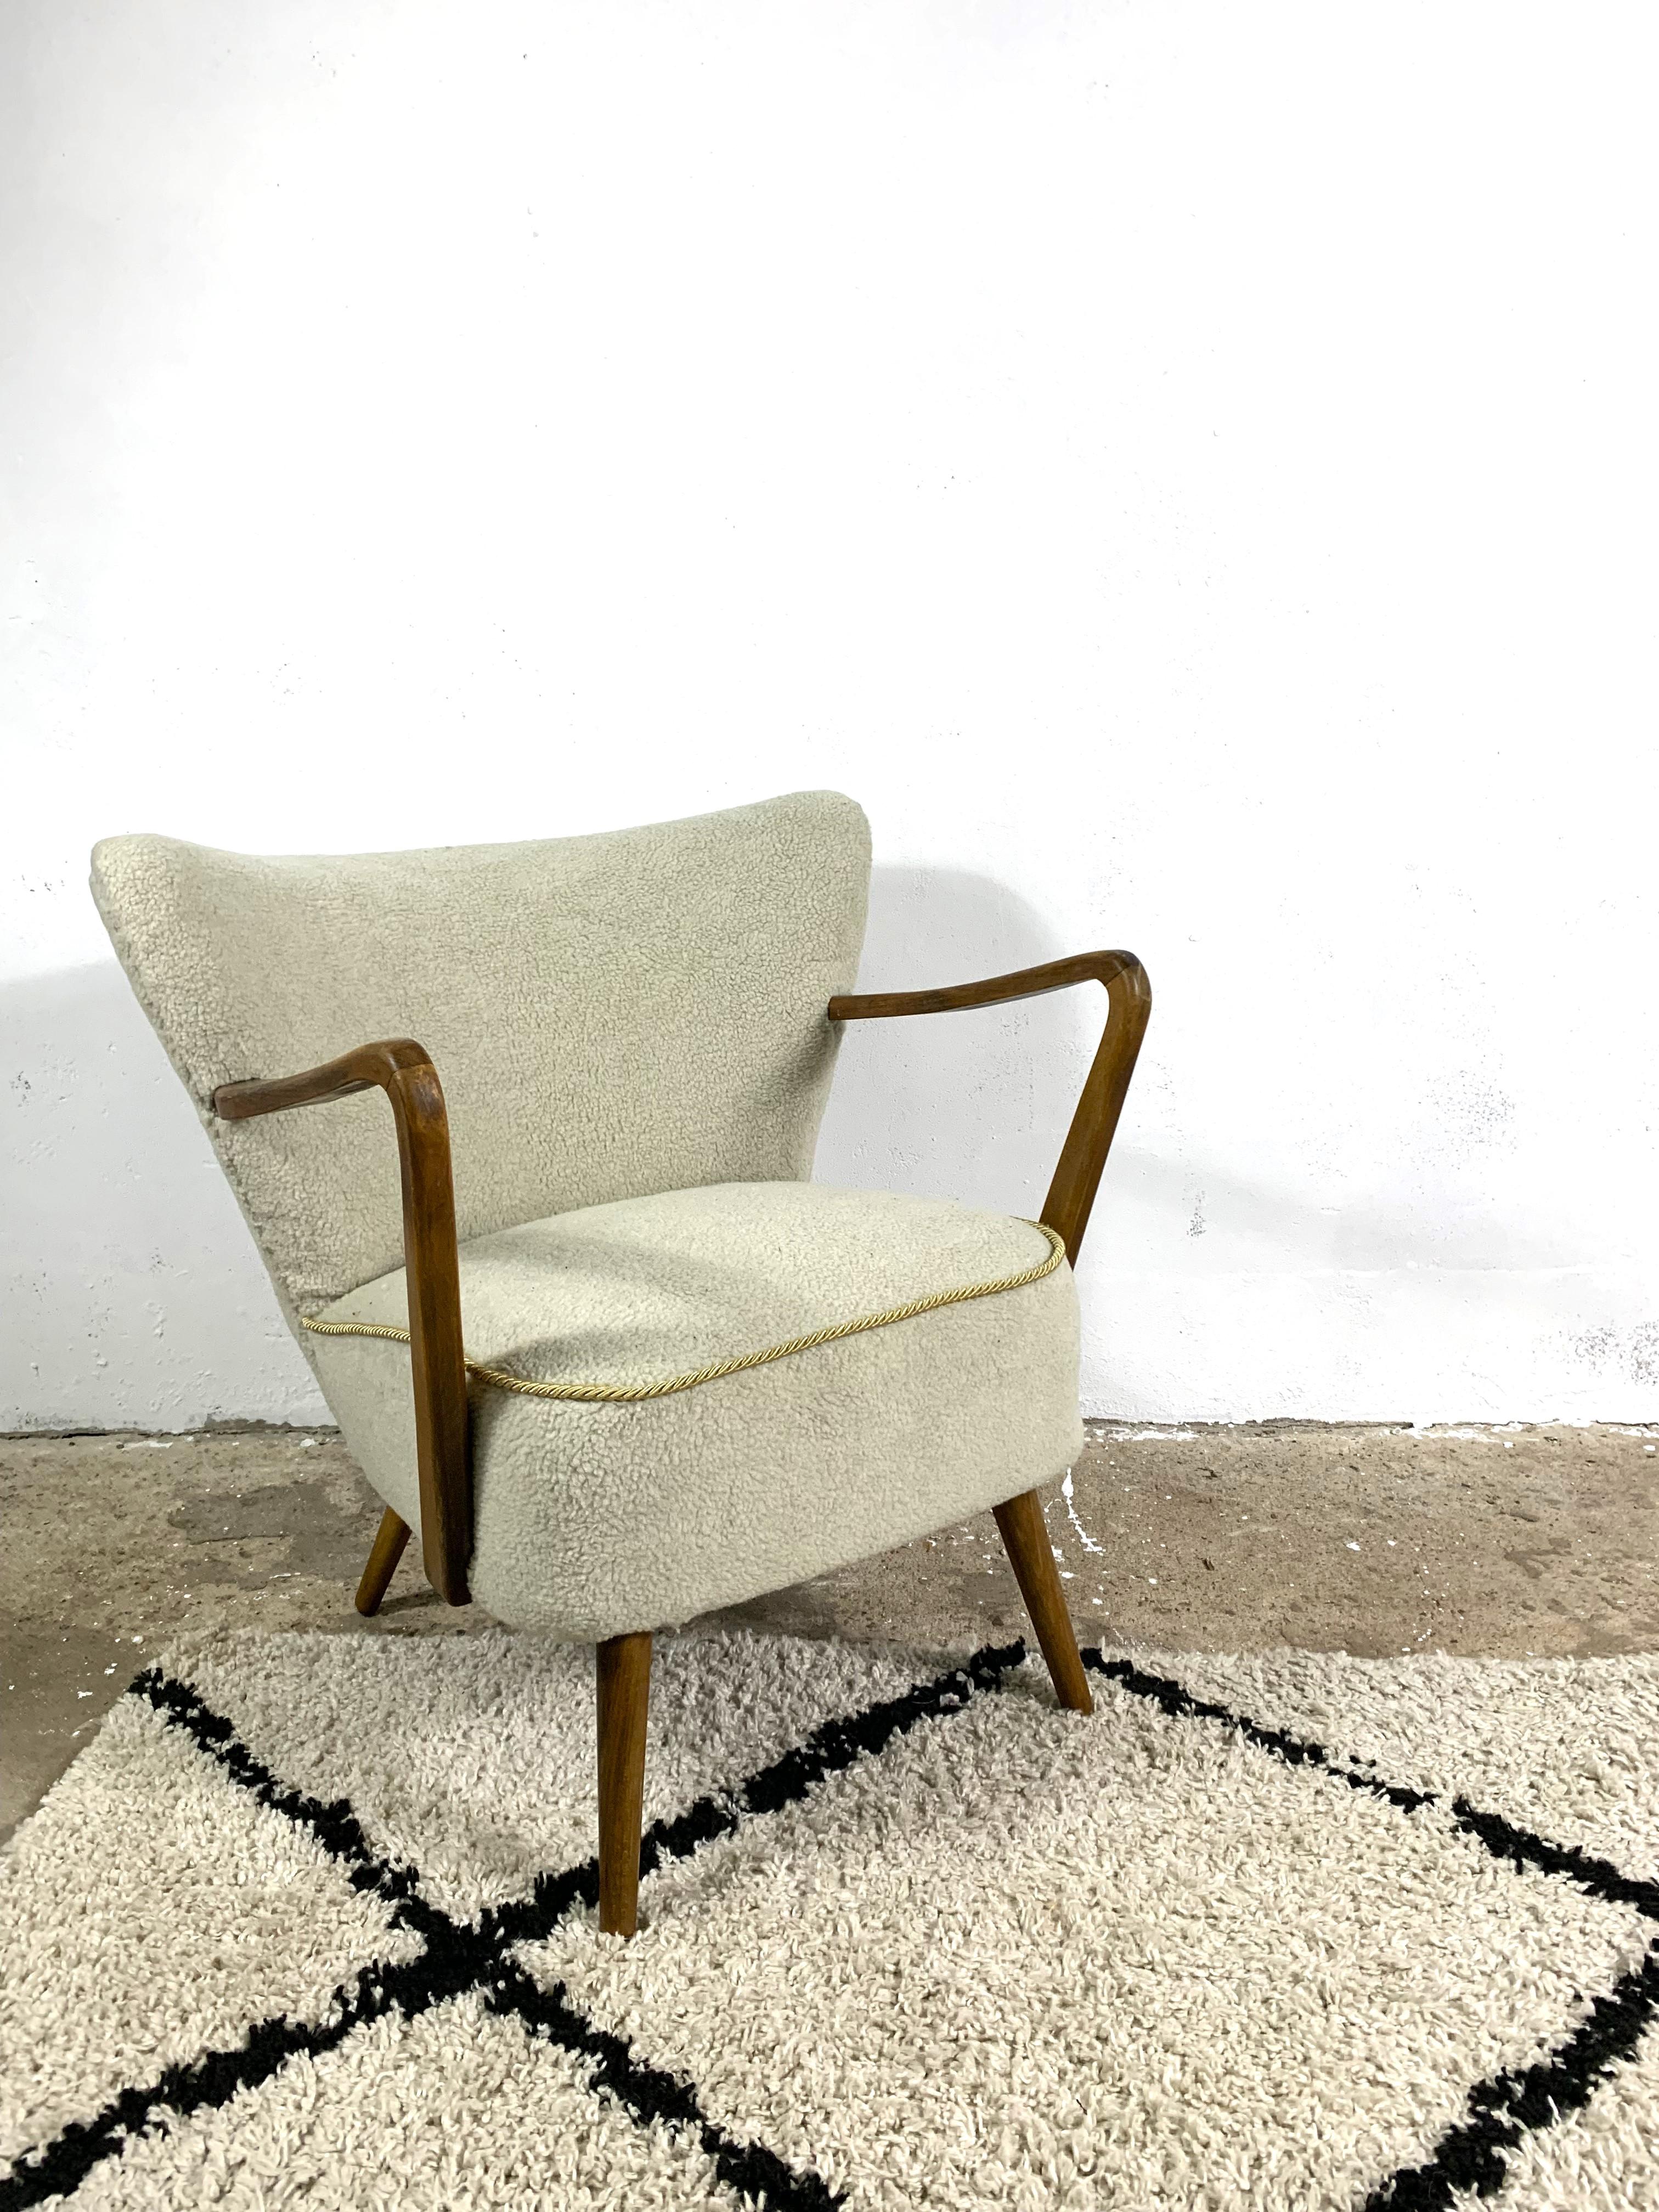 Cocktail chair with wooden armrests, original from the 1950s. Replaced filling, new upholstery made of soft boucle fabric. Stylish, comfortable piece of furniture.